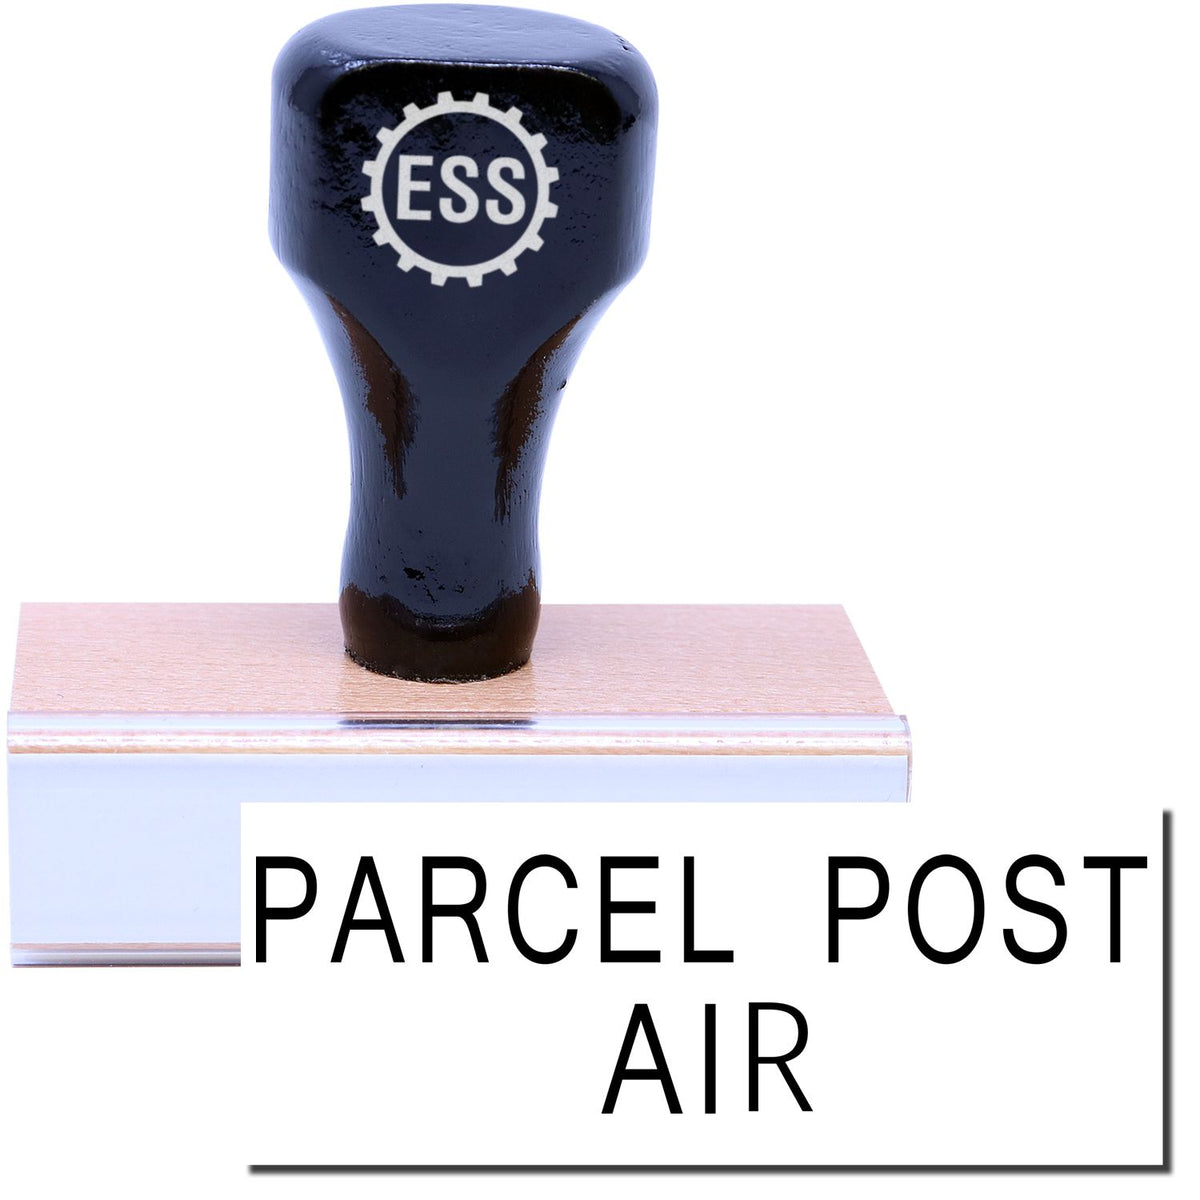 A stock office rubber stamp with a stamped image showing how the text &quot;PARCEL POST AIR&quot; in a large font is displayed after stamping.